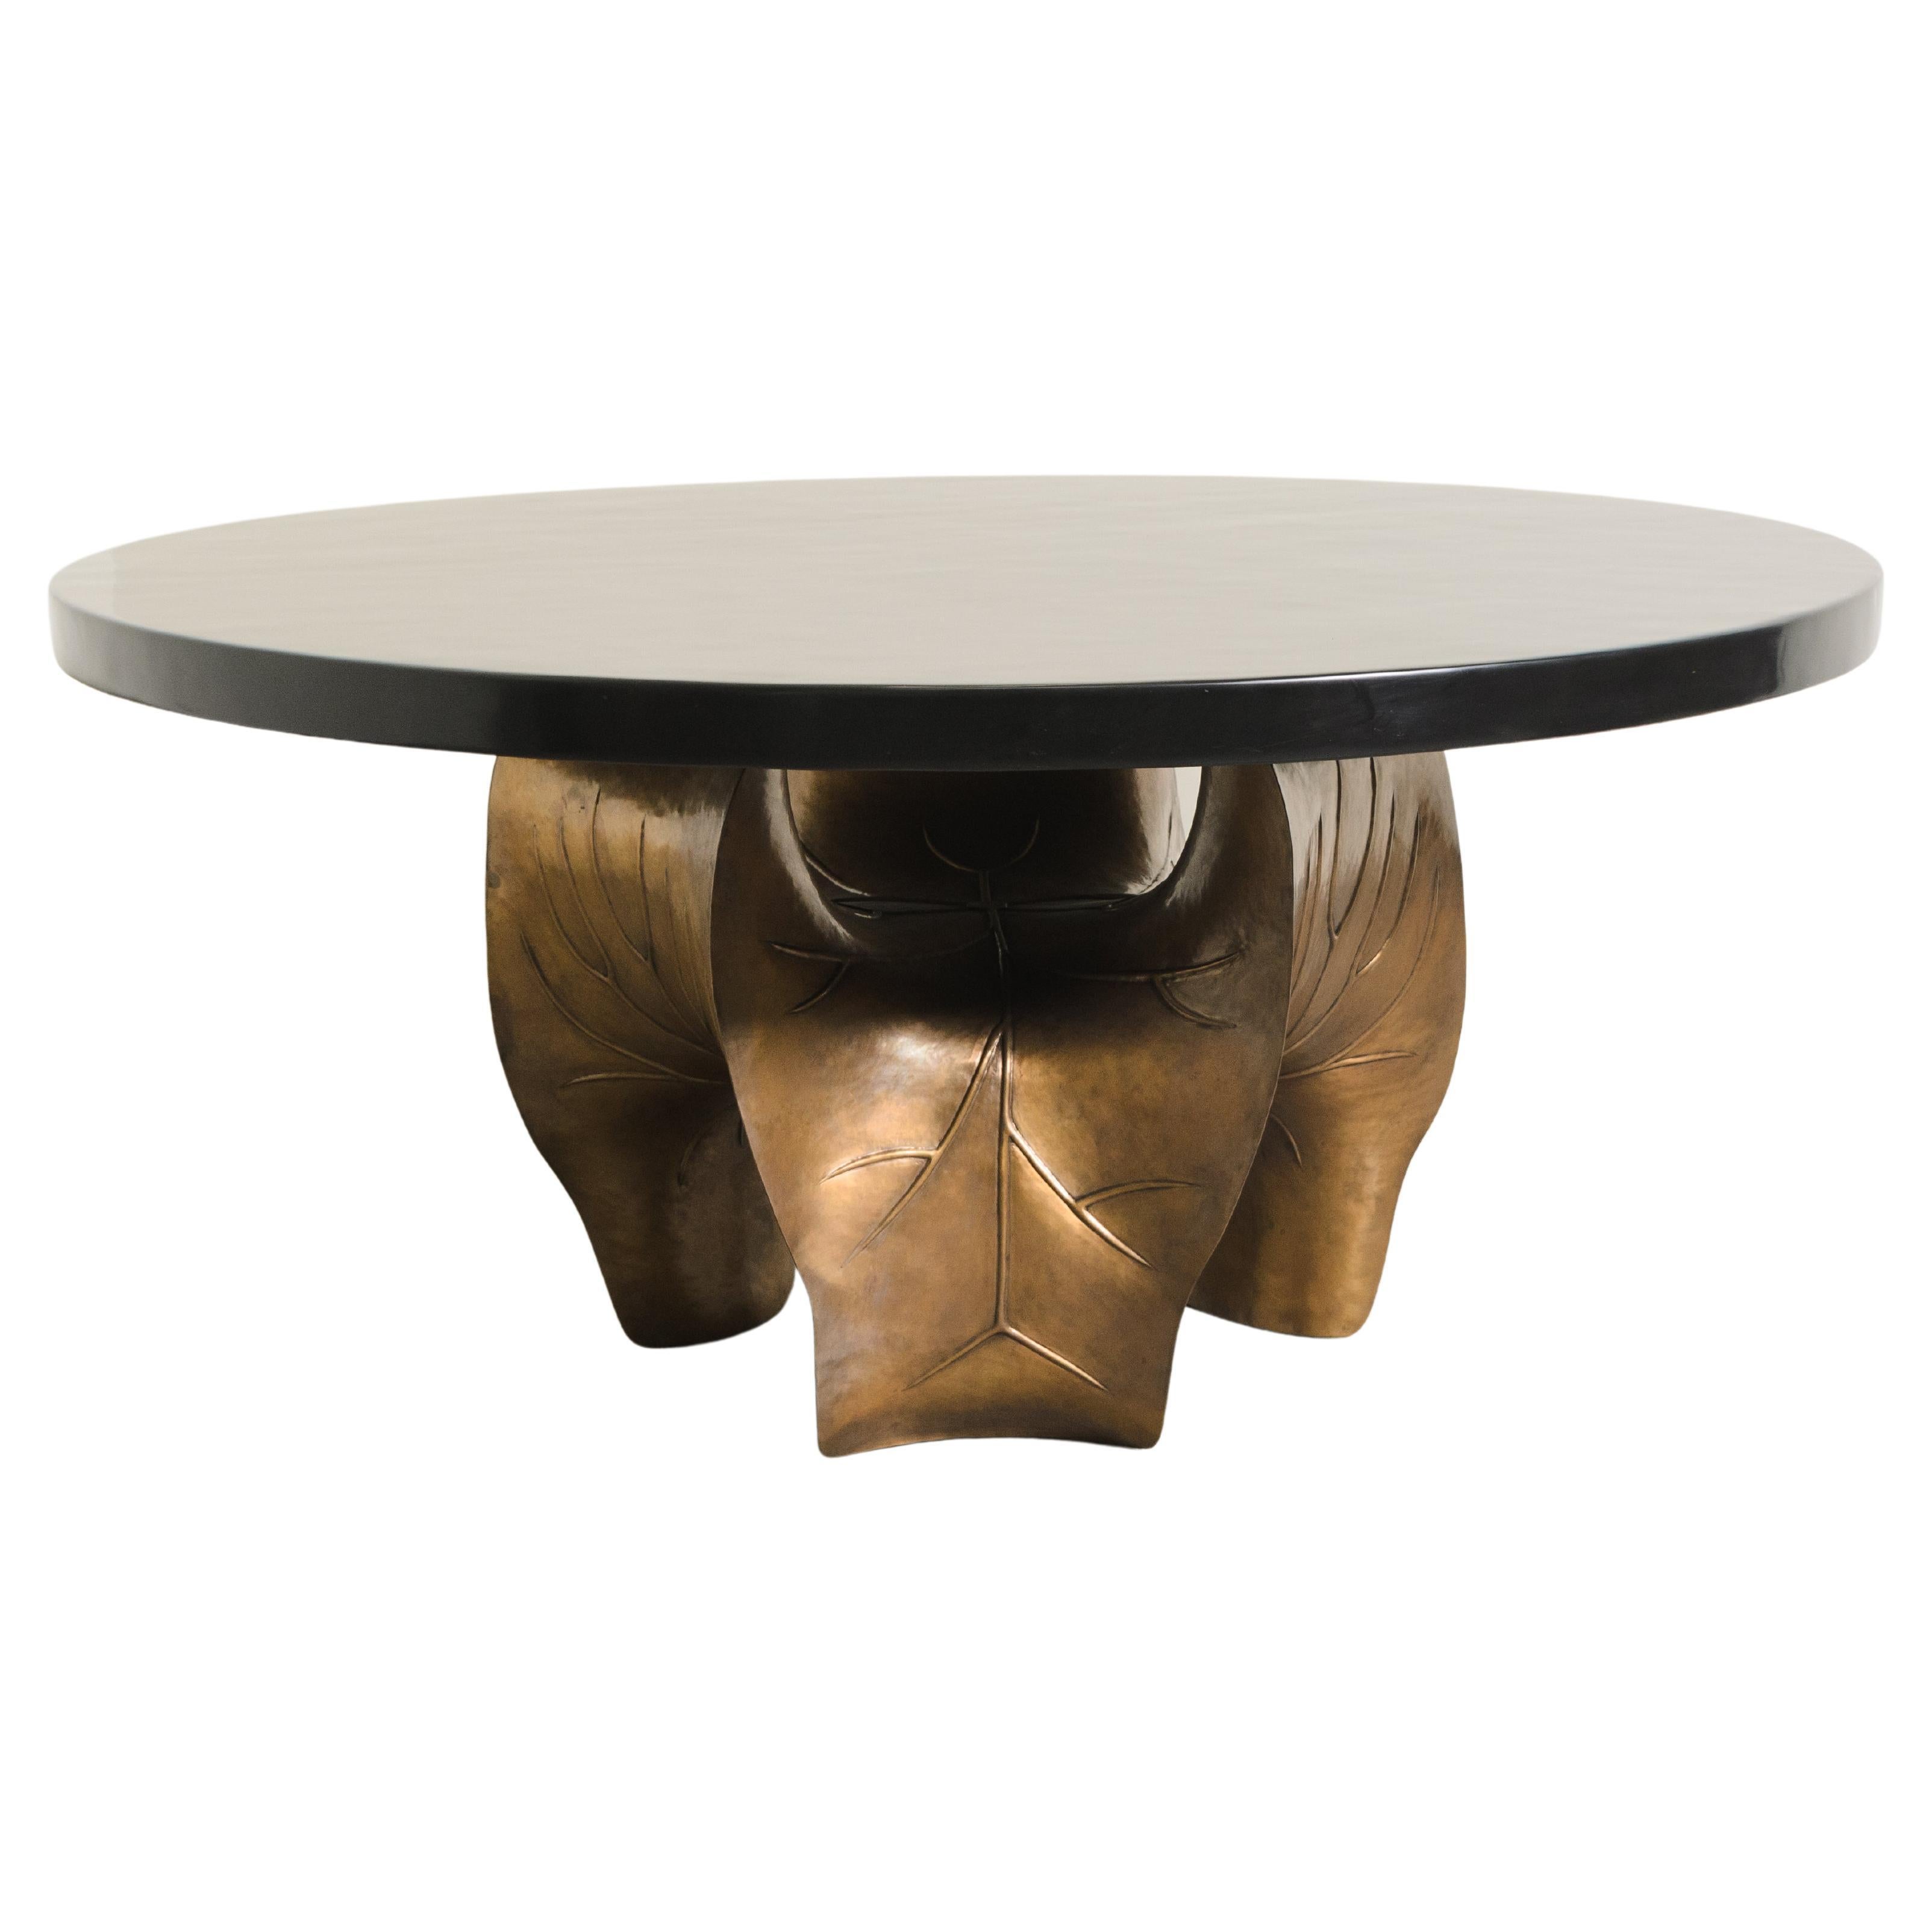 Contemporary Repoussé Lotus Leaf Shape Table Base in Brass by Robert Kuo